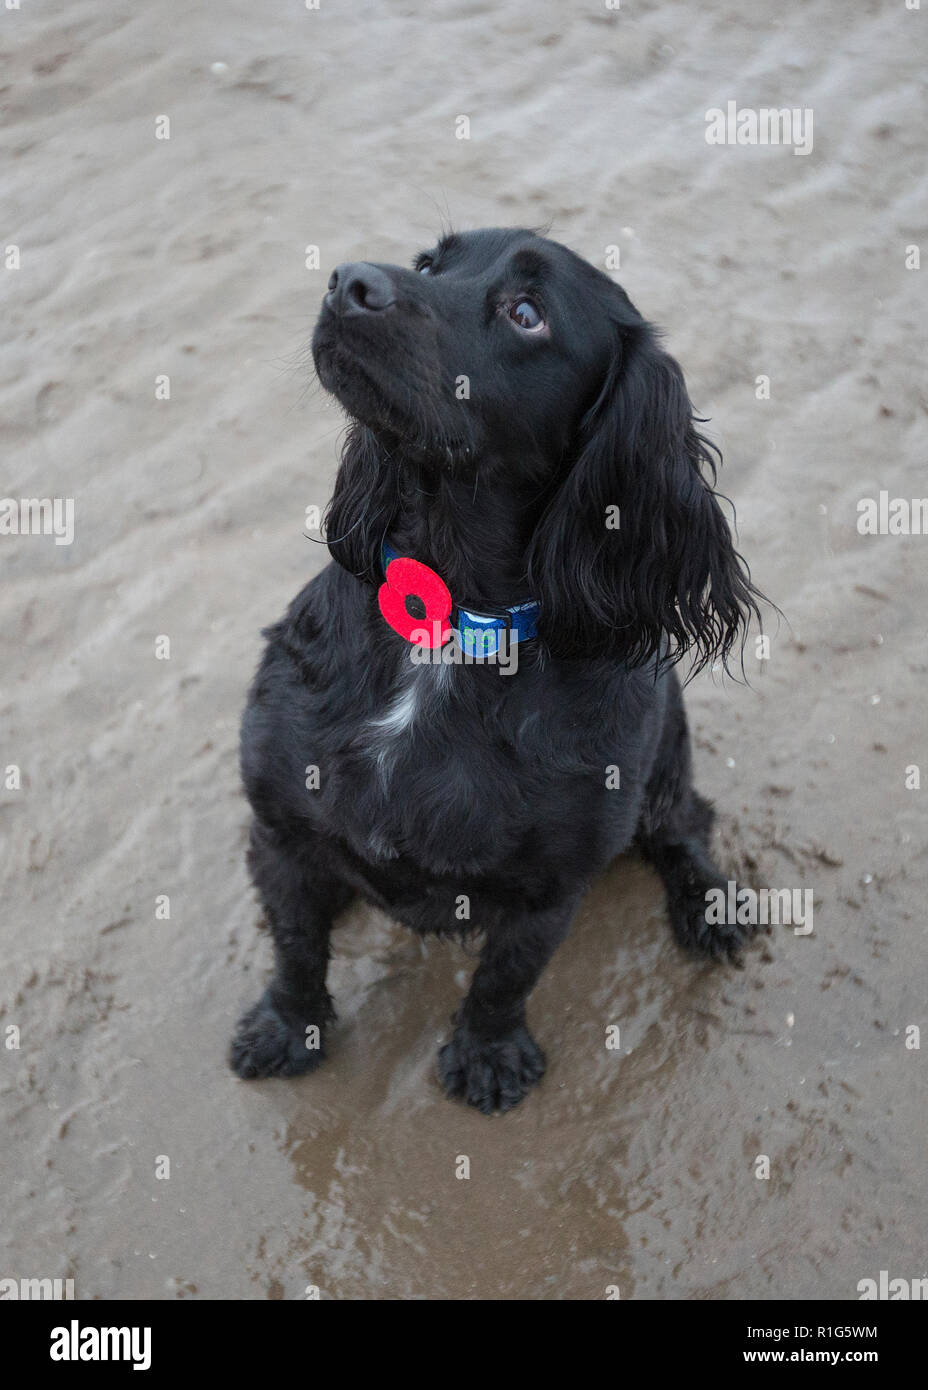 A black cocker spaniel dog wears a poppy dog collar during the Pages by the Sea project on Ayr beach in Ayrshire, Scotland Stock Photo